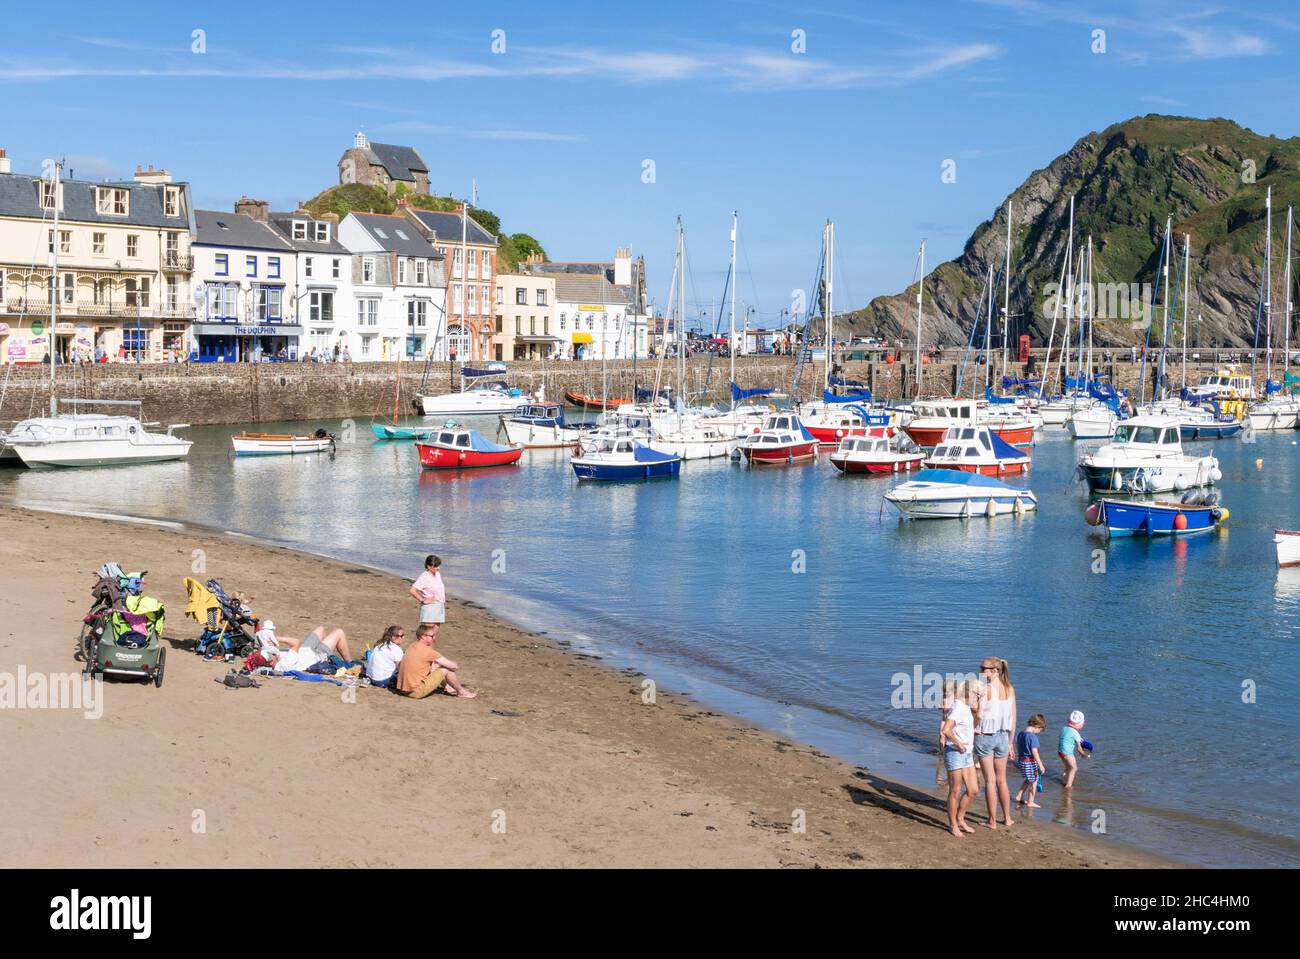 Ilfracombe beach with The Chapel of St Nicholas above the fishing boats and yachts in the harbour and town of Ilfracombe Devon England UK GB Europe Stock Photo